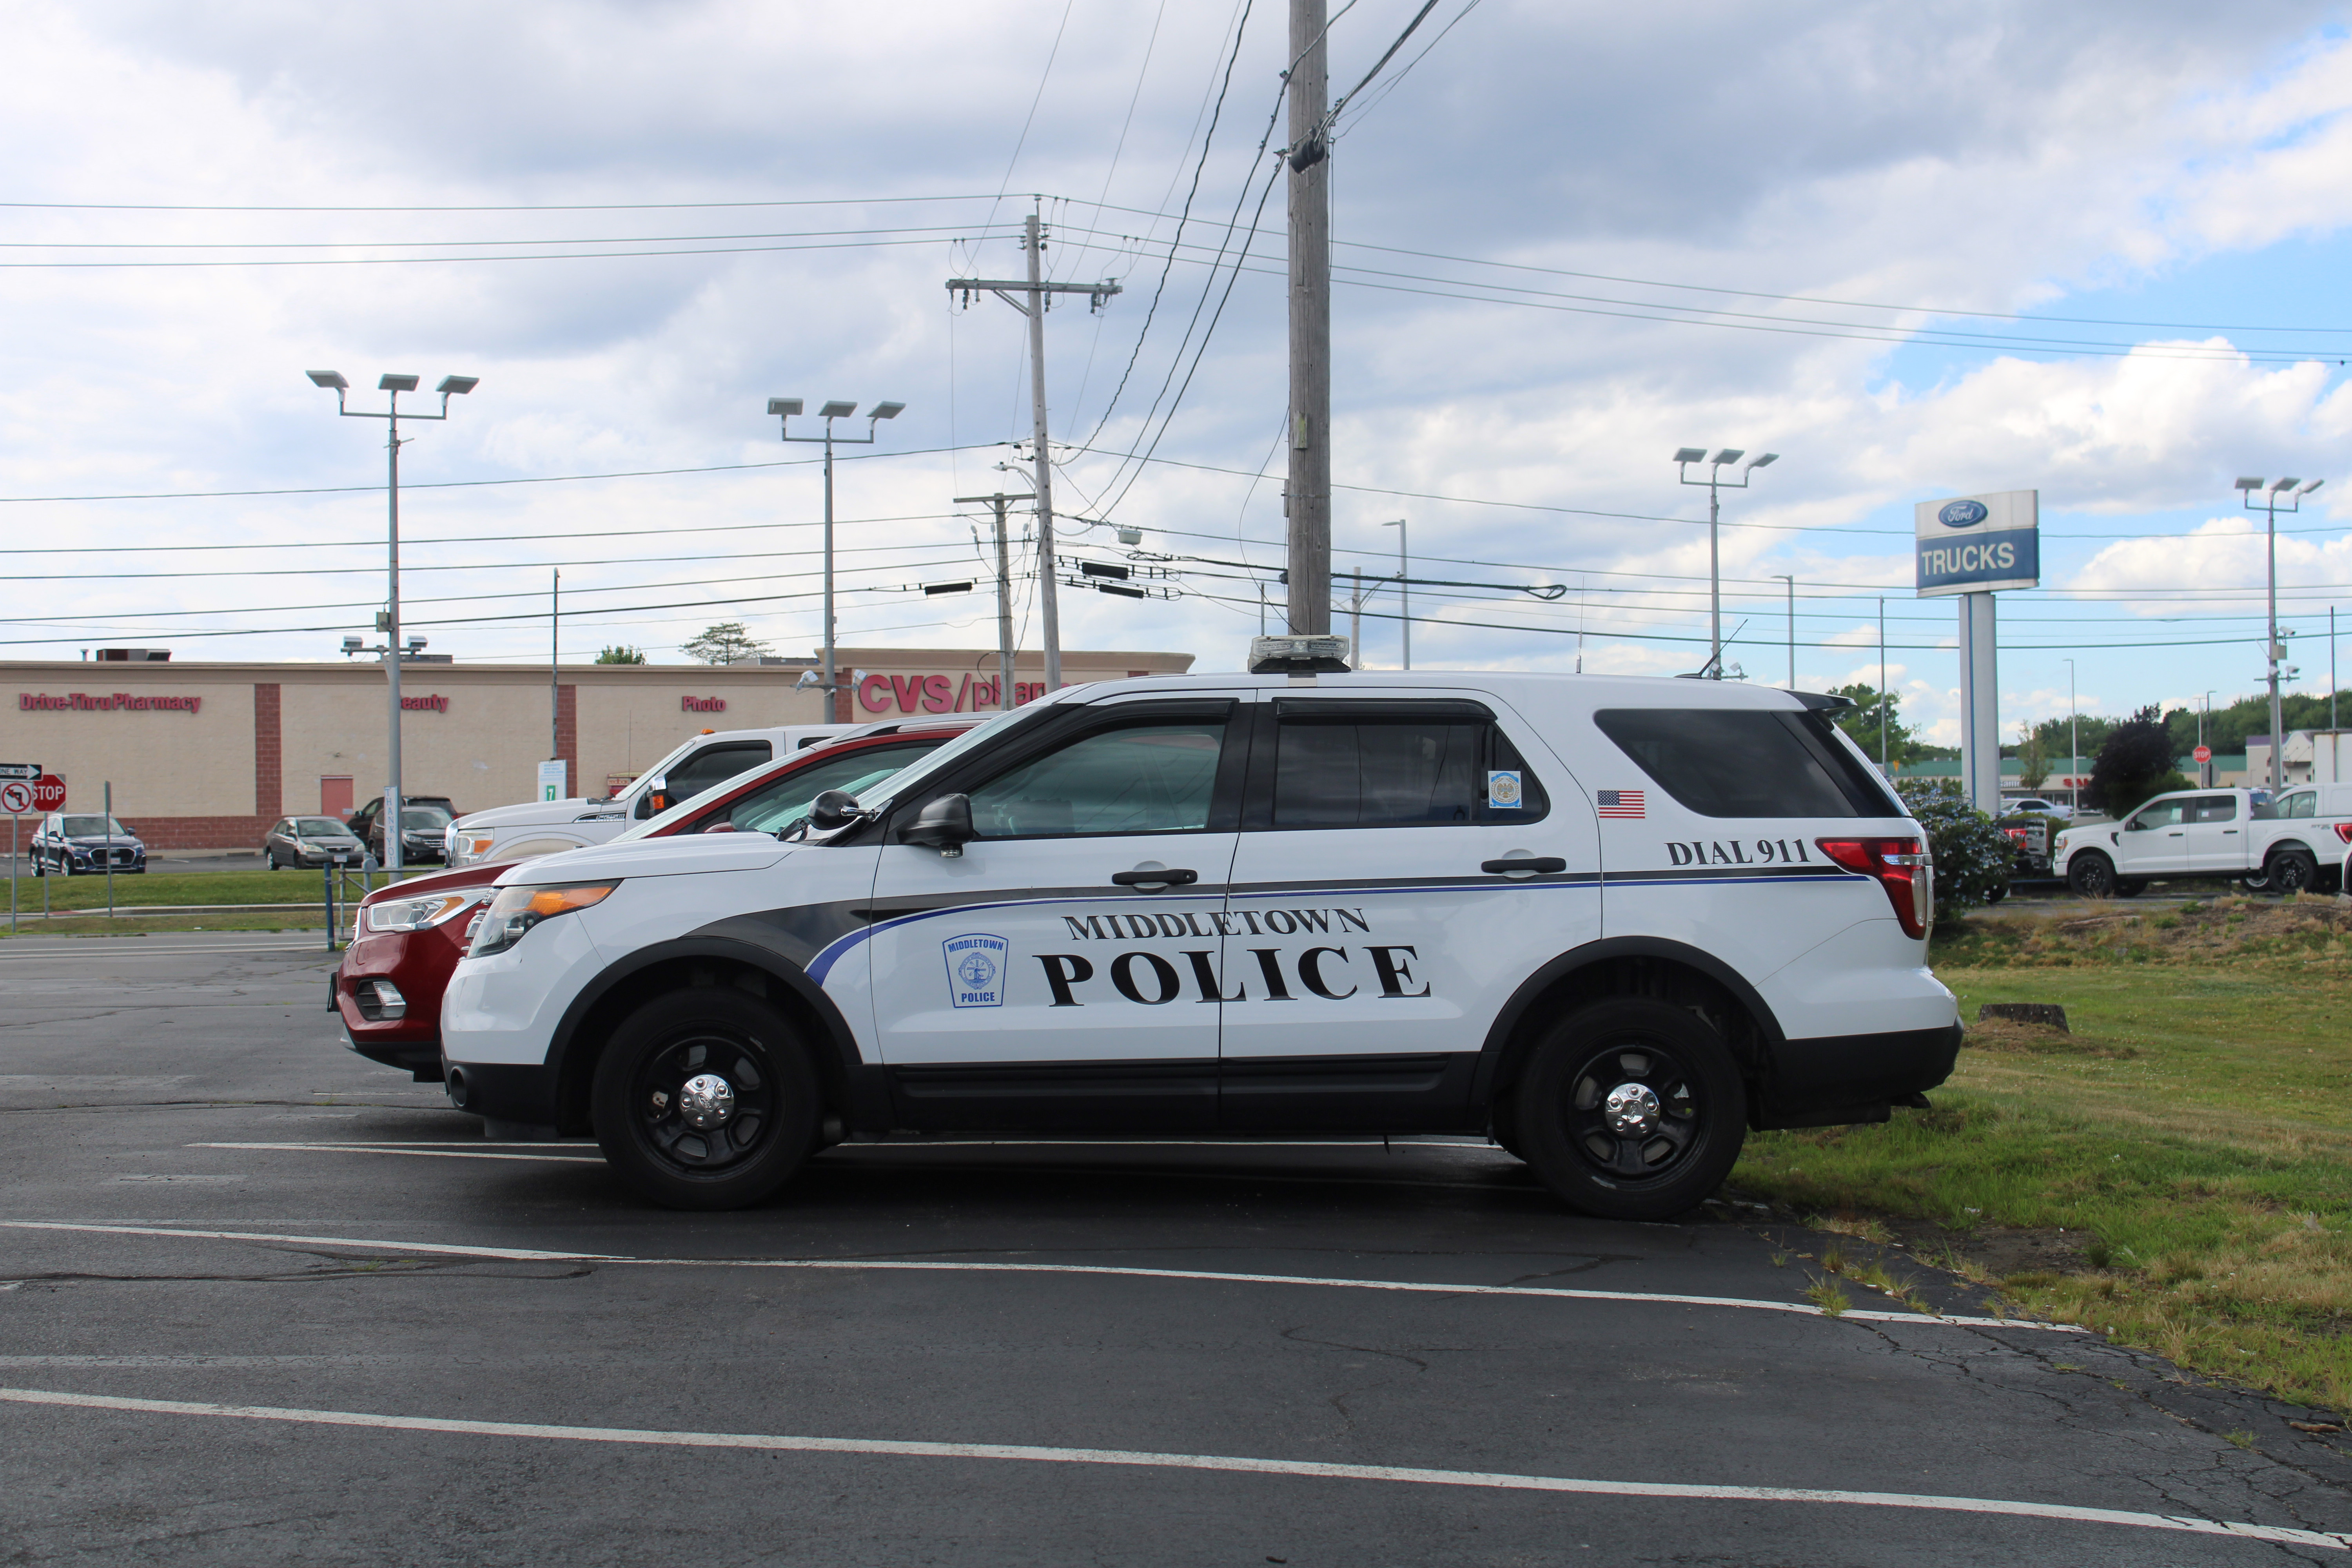 A photo  of Middletown Police
            Cruiser 4816, a 2015 Ford Police Interceptor Utility             taken by @riemergencyvehicles